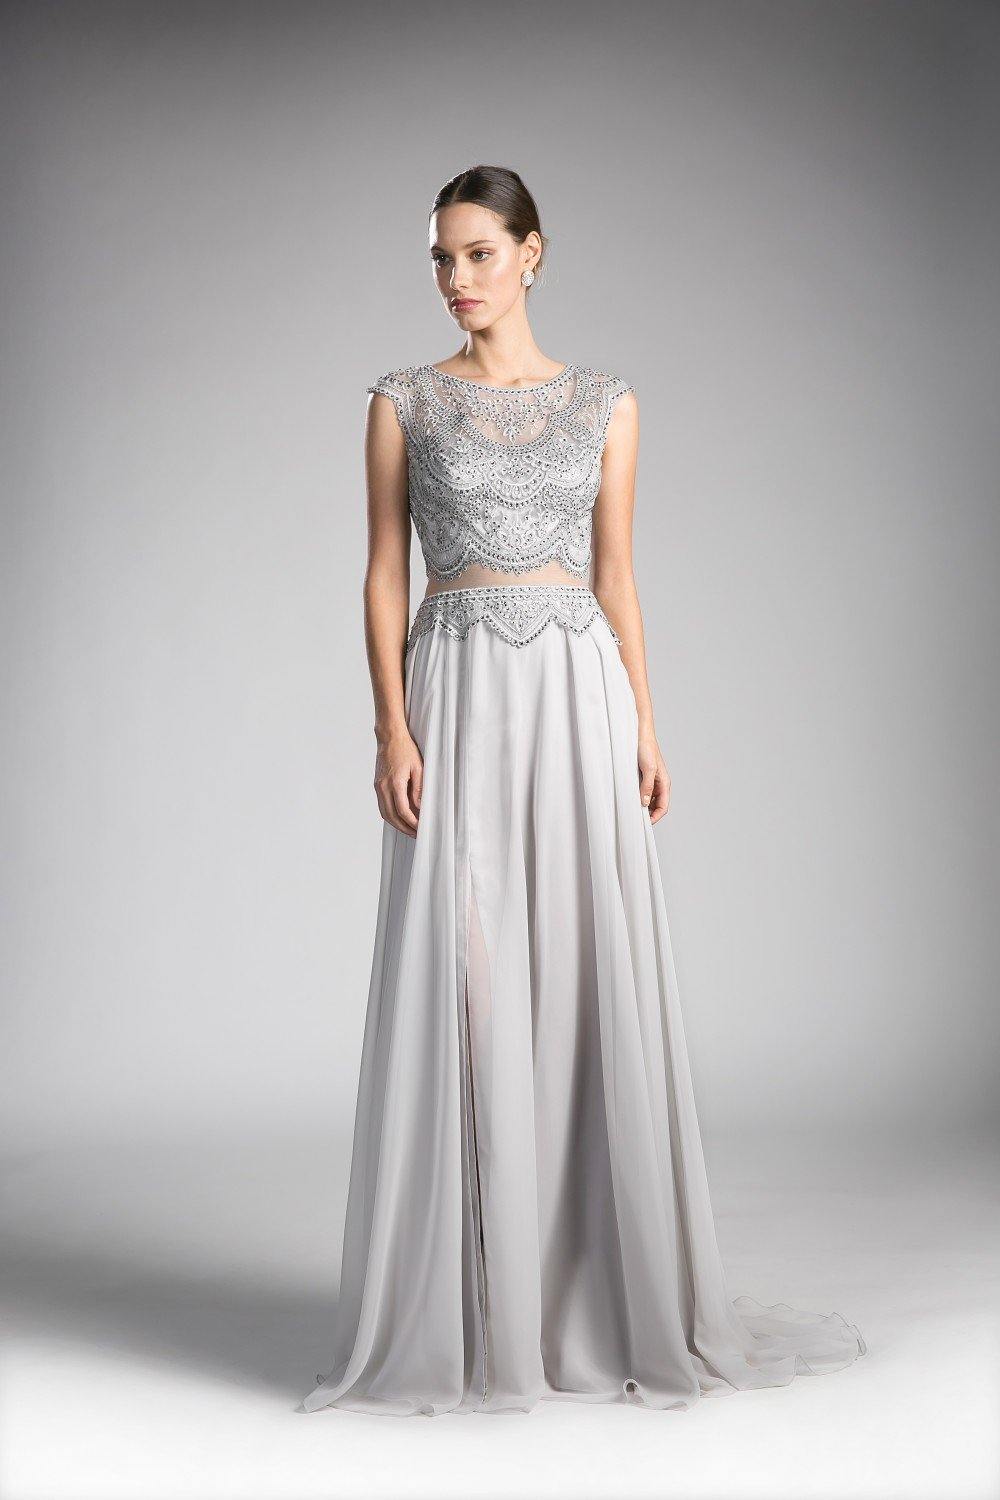 Prom Long Dress Formal - The Dress Outlet